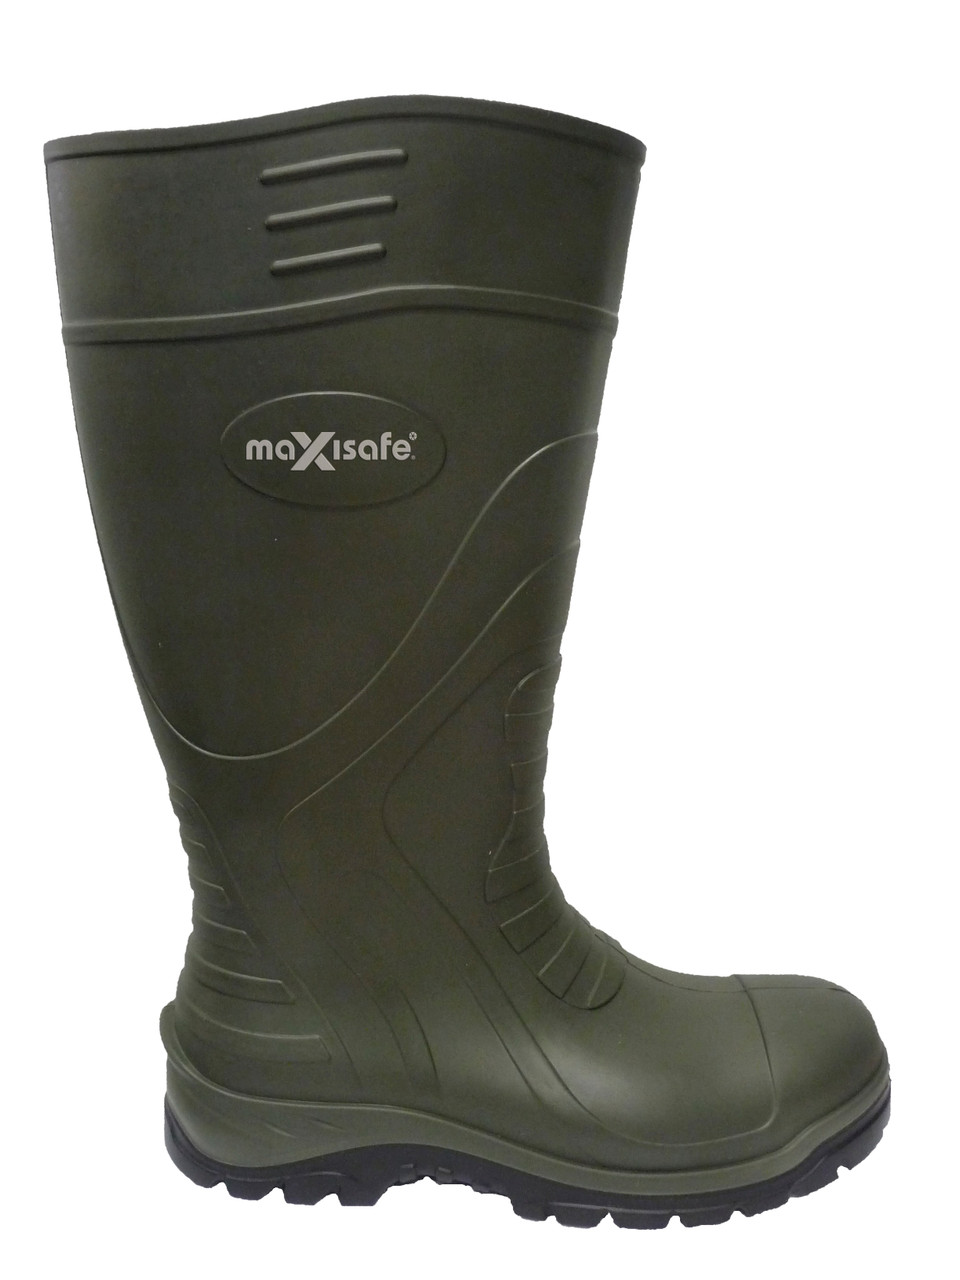 Patrol Green Pu Boot W/ Safety Toe, Size 5